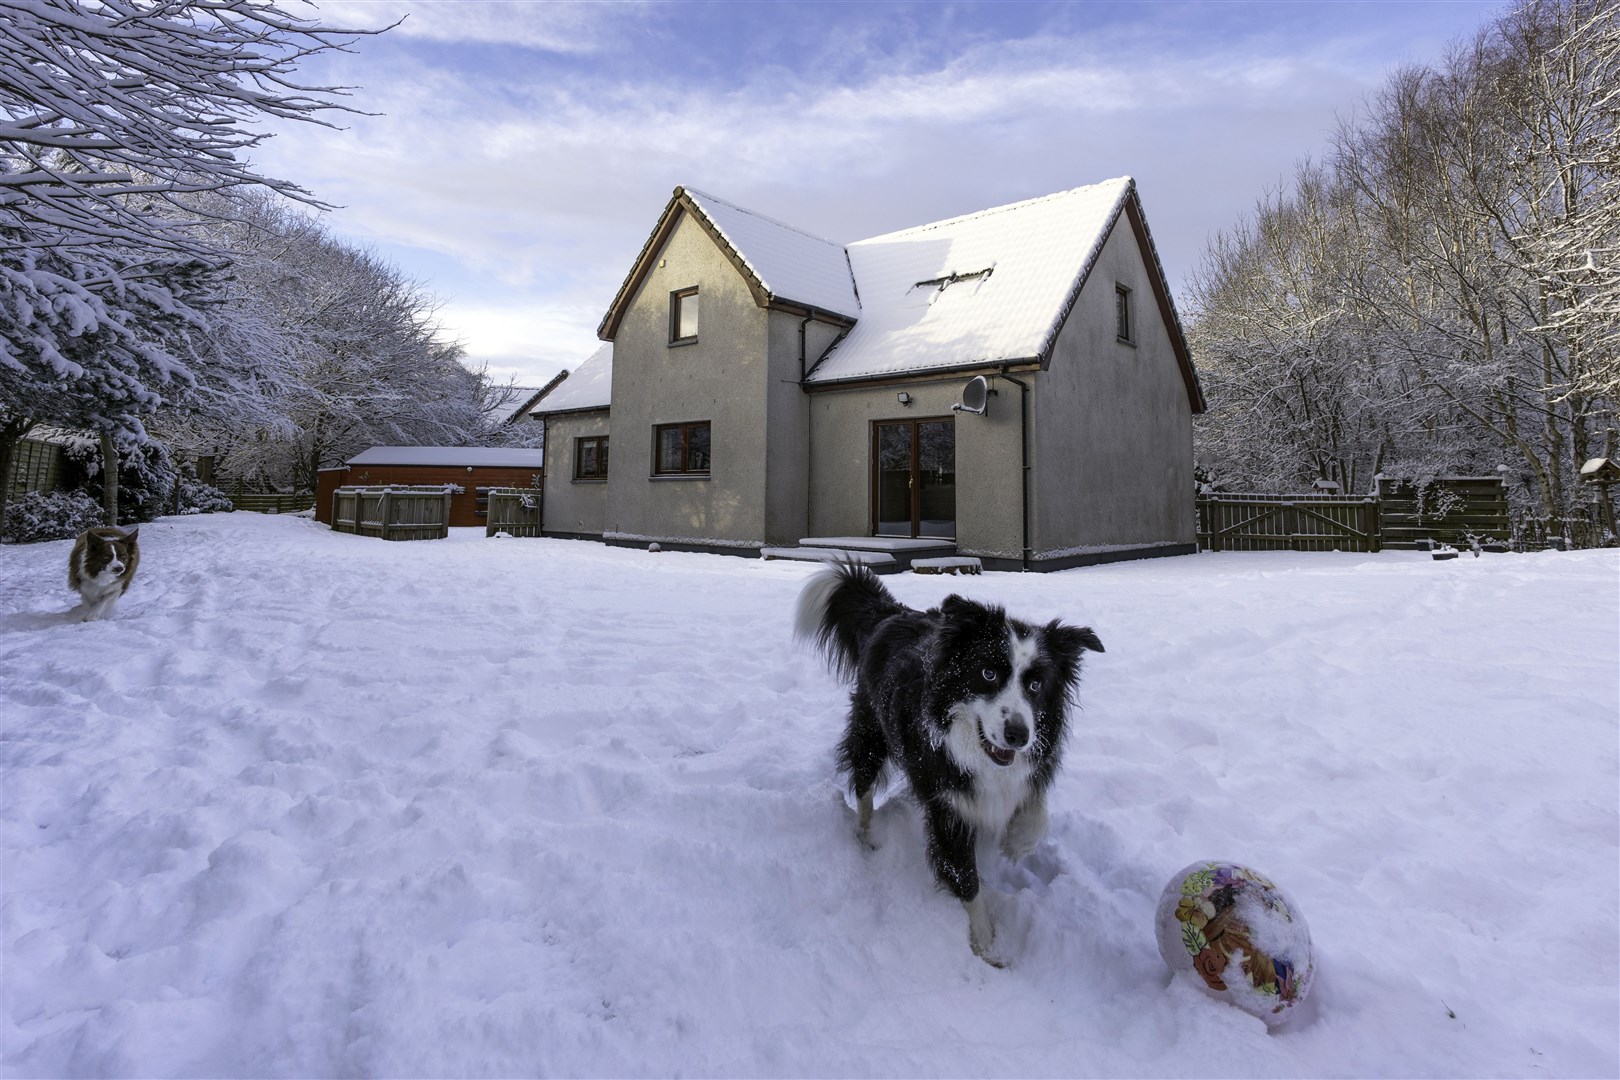 Having so much fun playing in the snow were Sam and Caley enjoying a game of football at home in Kildary. The happy picture was shared by Alan Simpson.